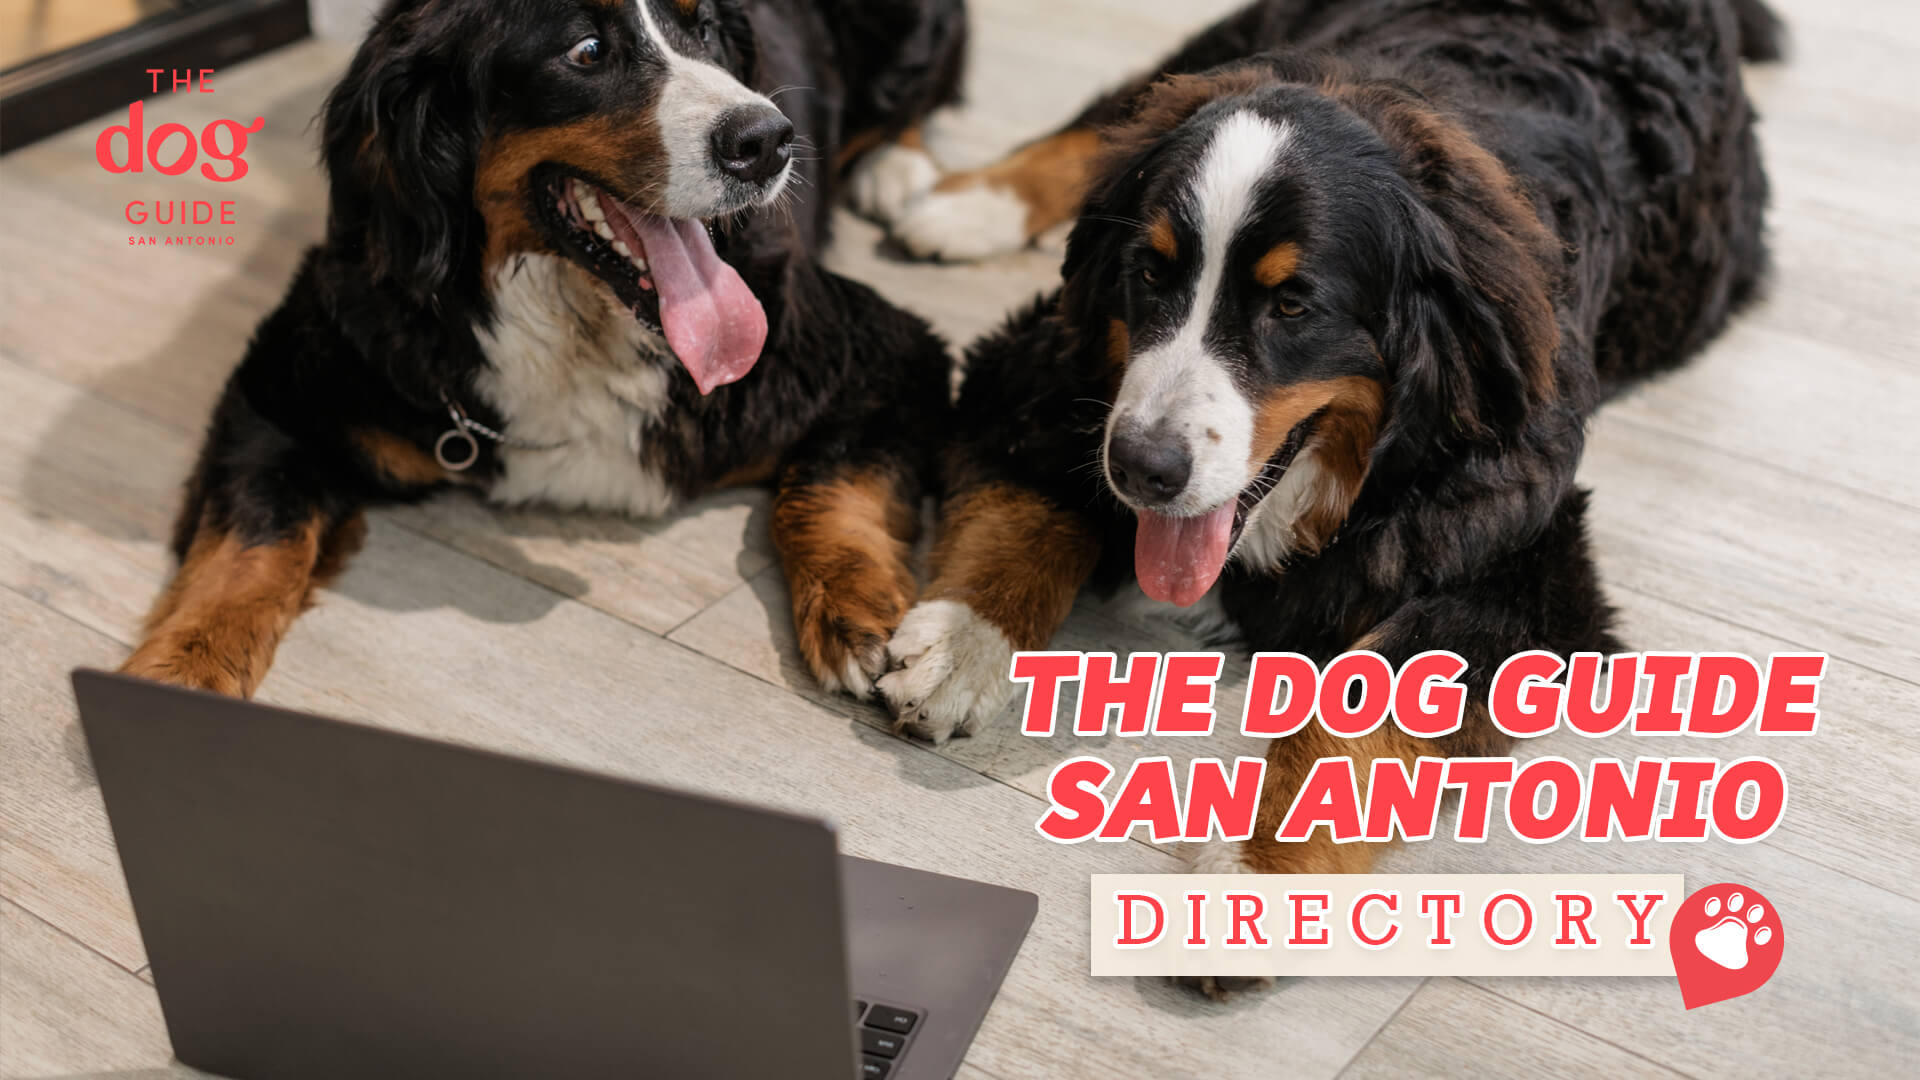 dogs looking at laptop, text reads "the dog guide san antonio directory"